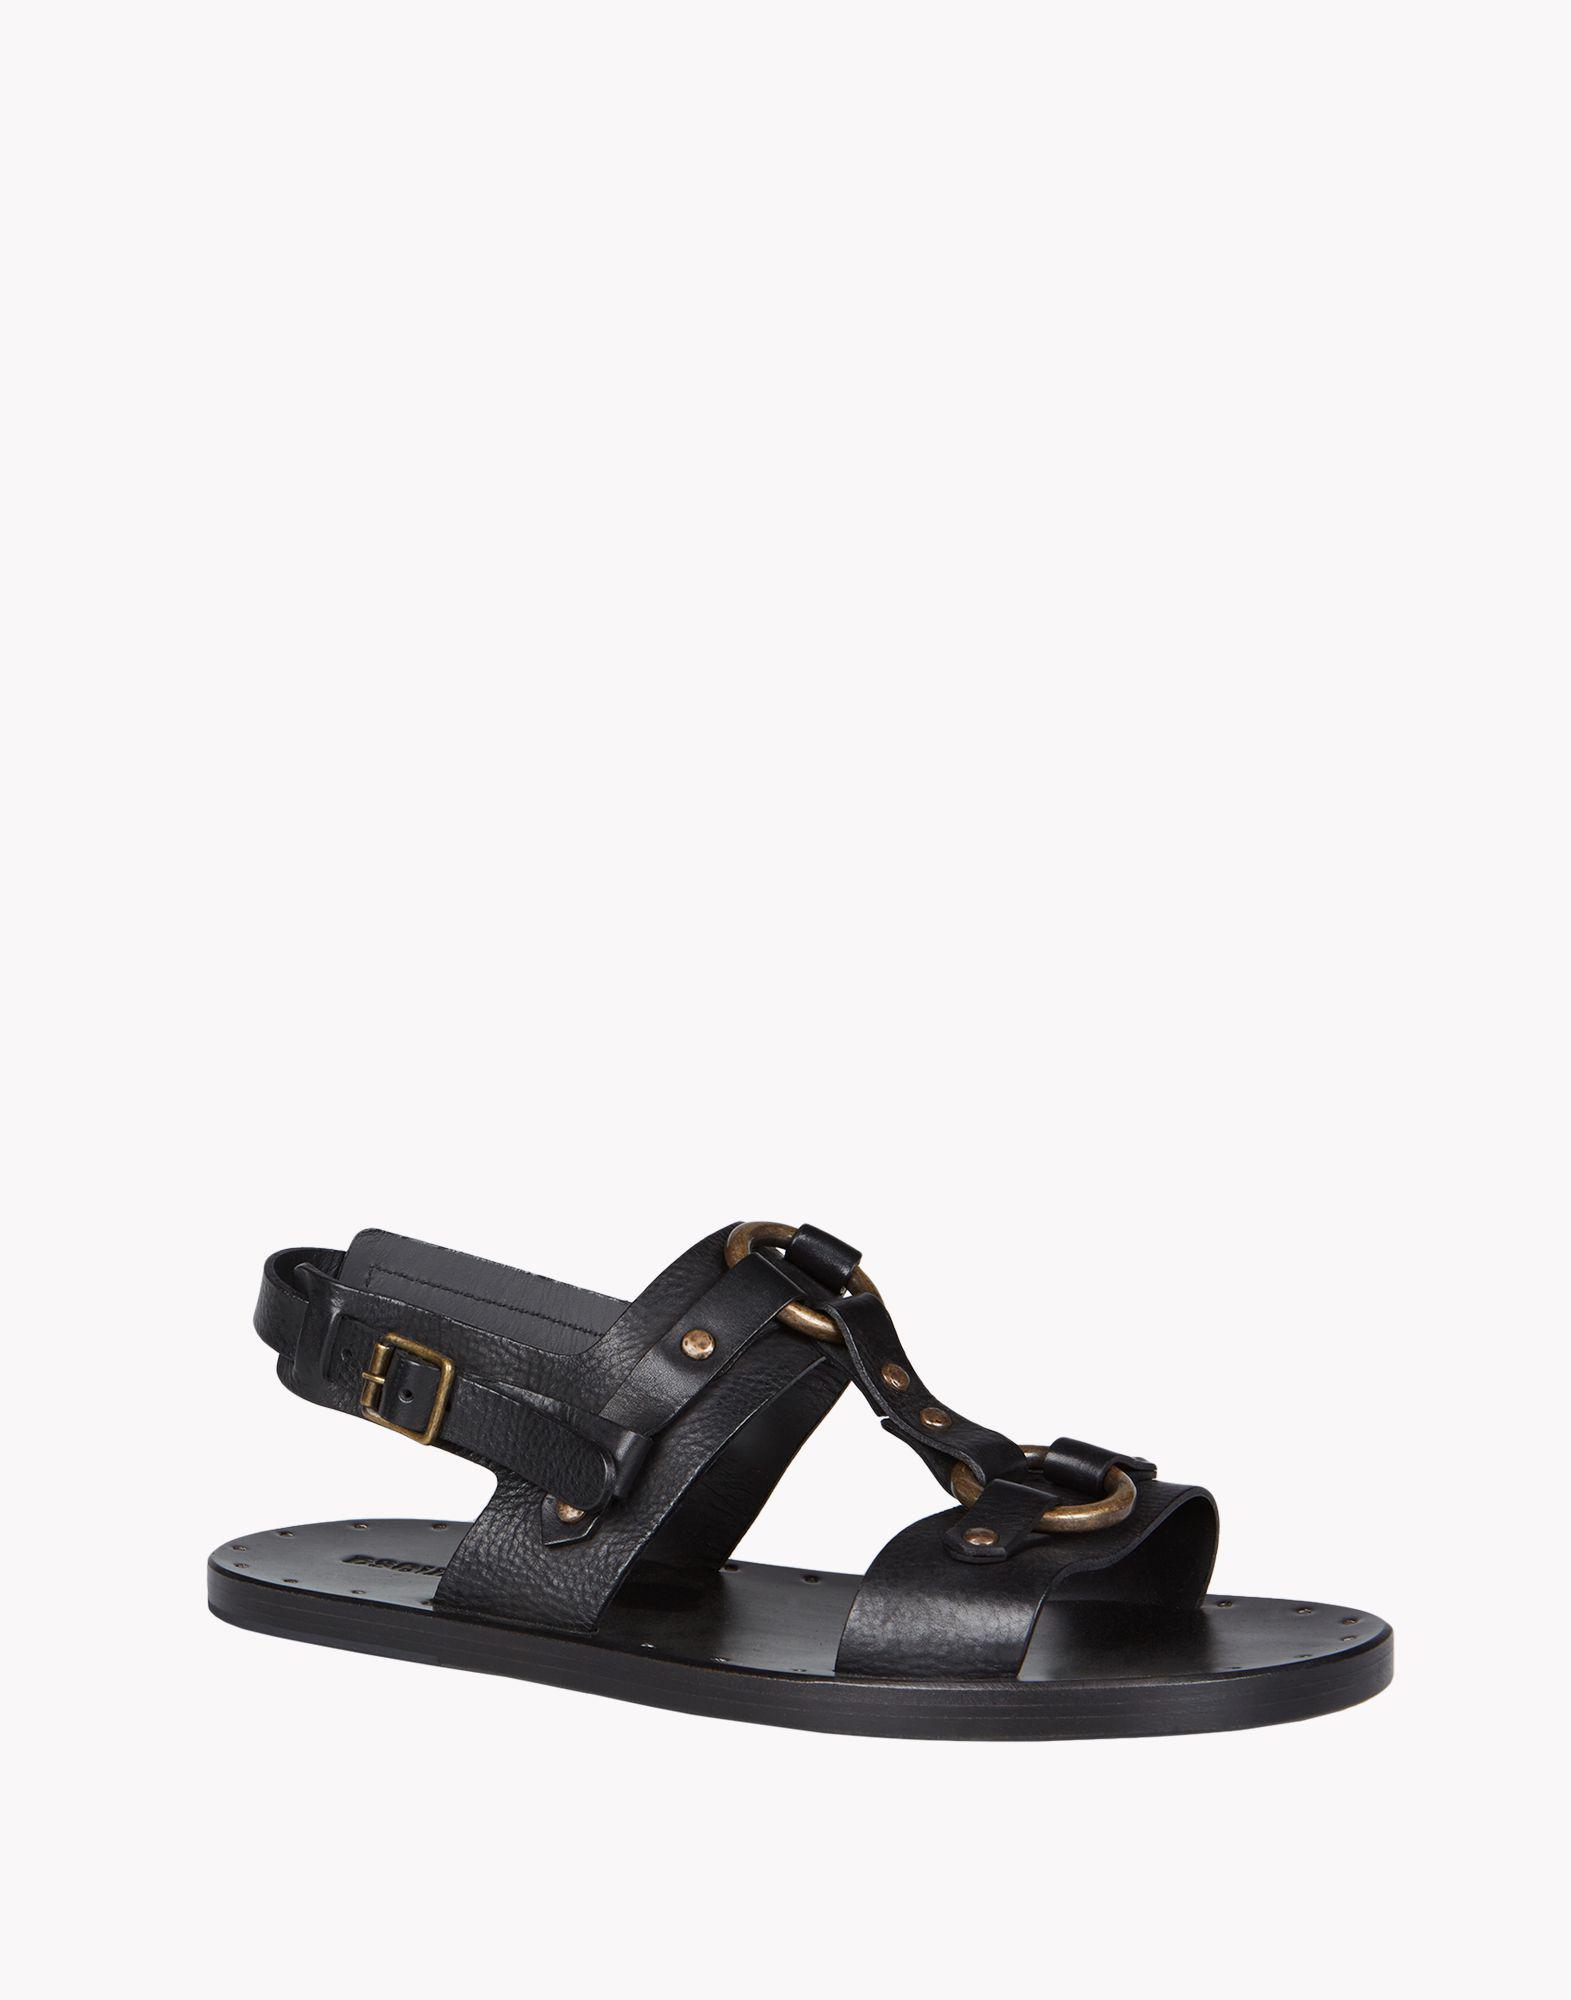 Lyst - DSquared² Moses Sandals in Black for Men